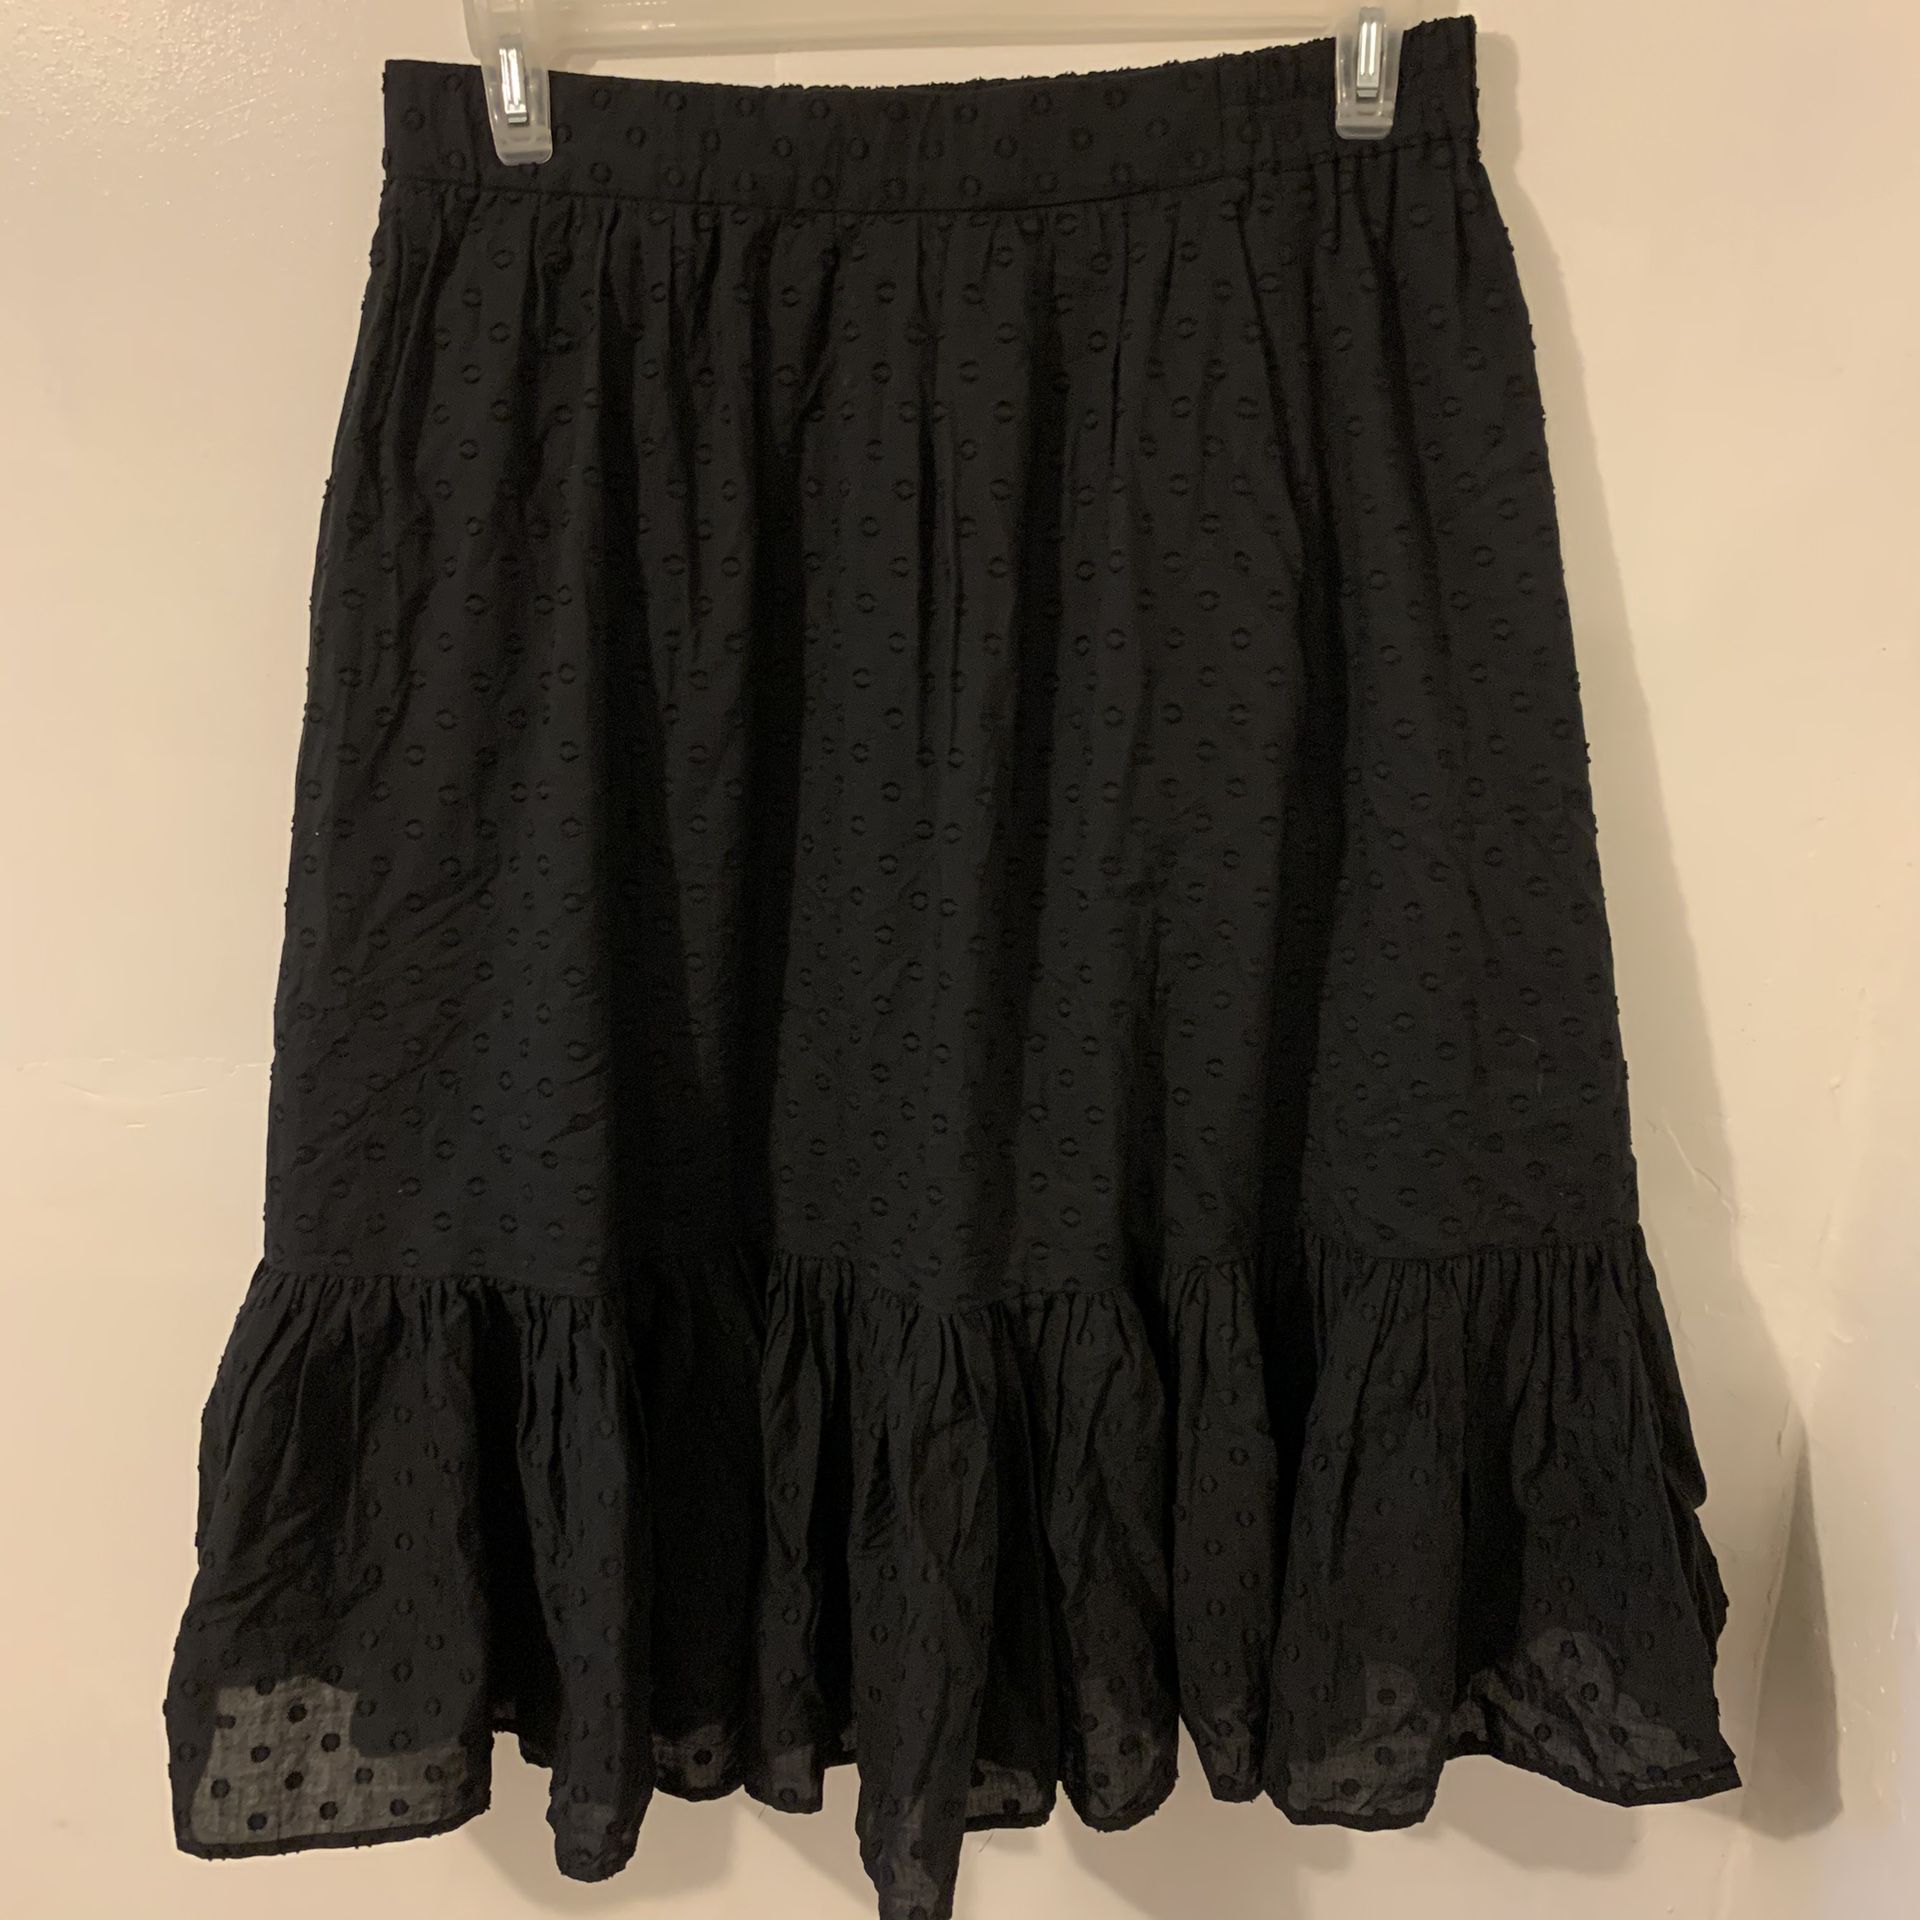 NEW J.Crew Women's A Line Black Skirt Size 12 - Brand New With Tags - Retails for $89.50. JCrew J Crew. 1